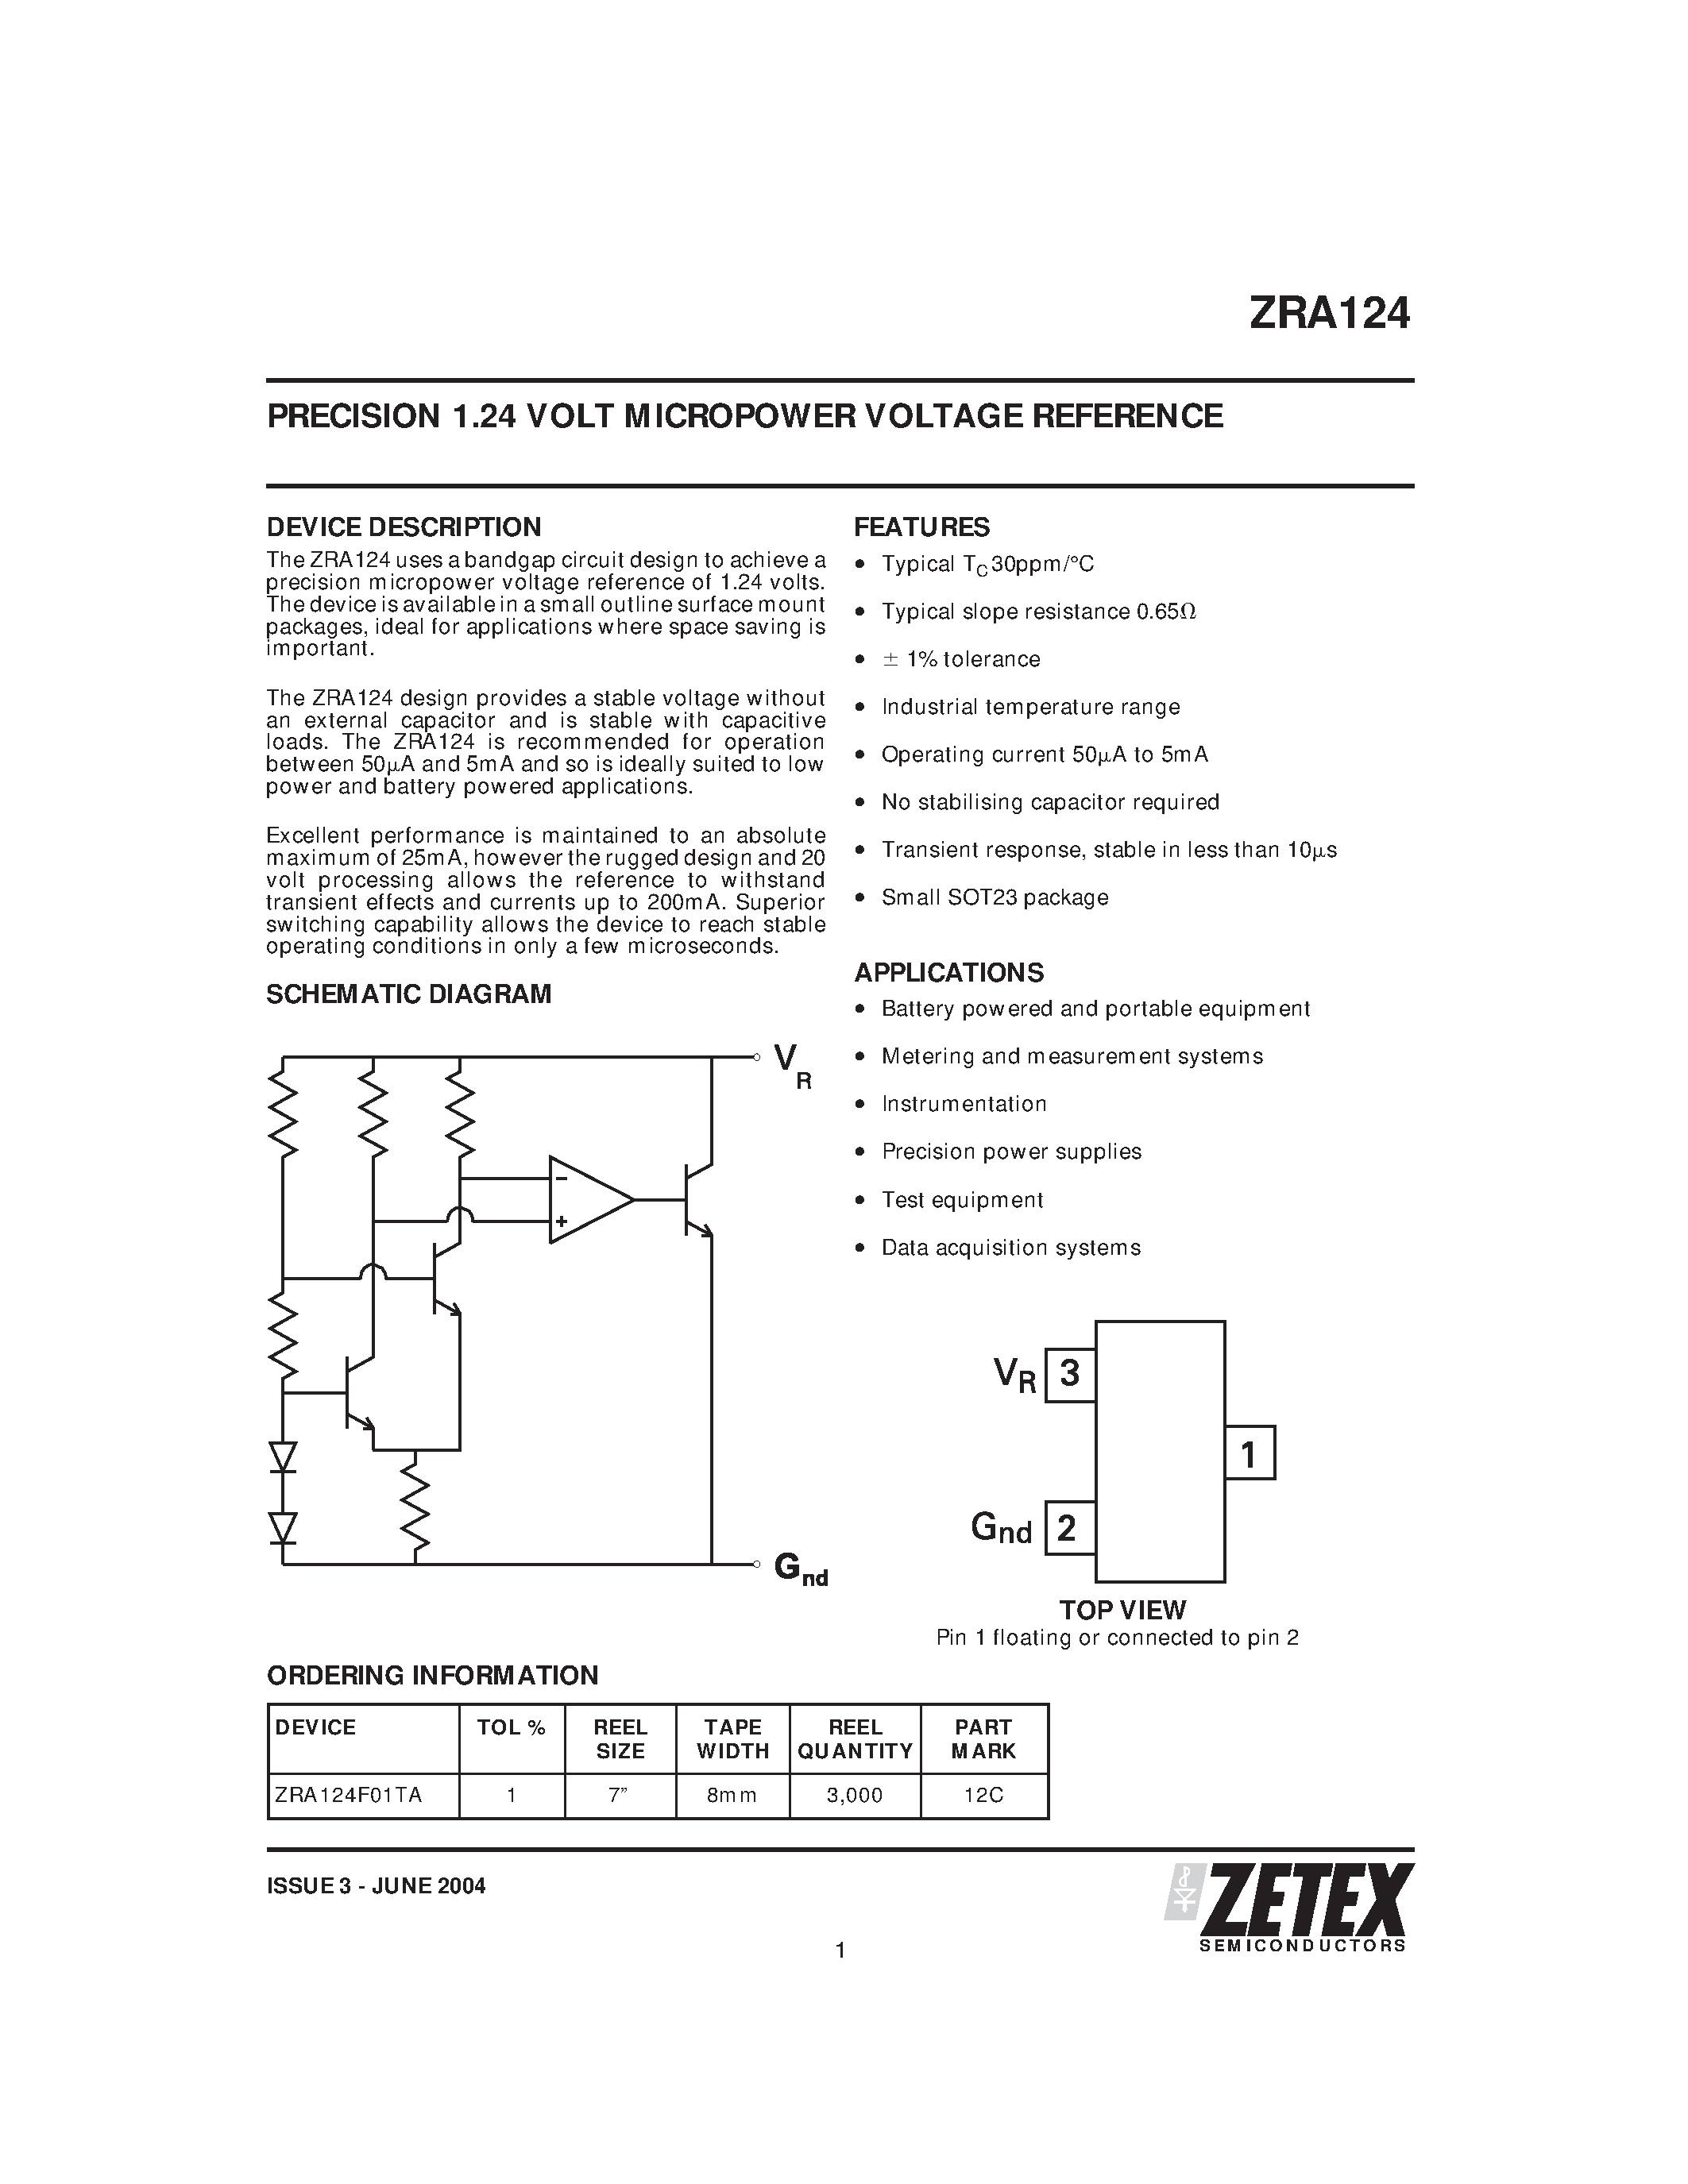 Datasheet ZRA124 - PRECISION 1.24 VOLT MICROPOWER VOLTAGE REFERENCE page 1